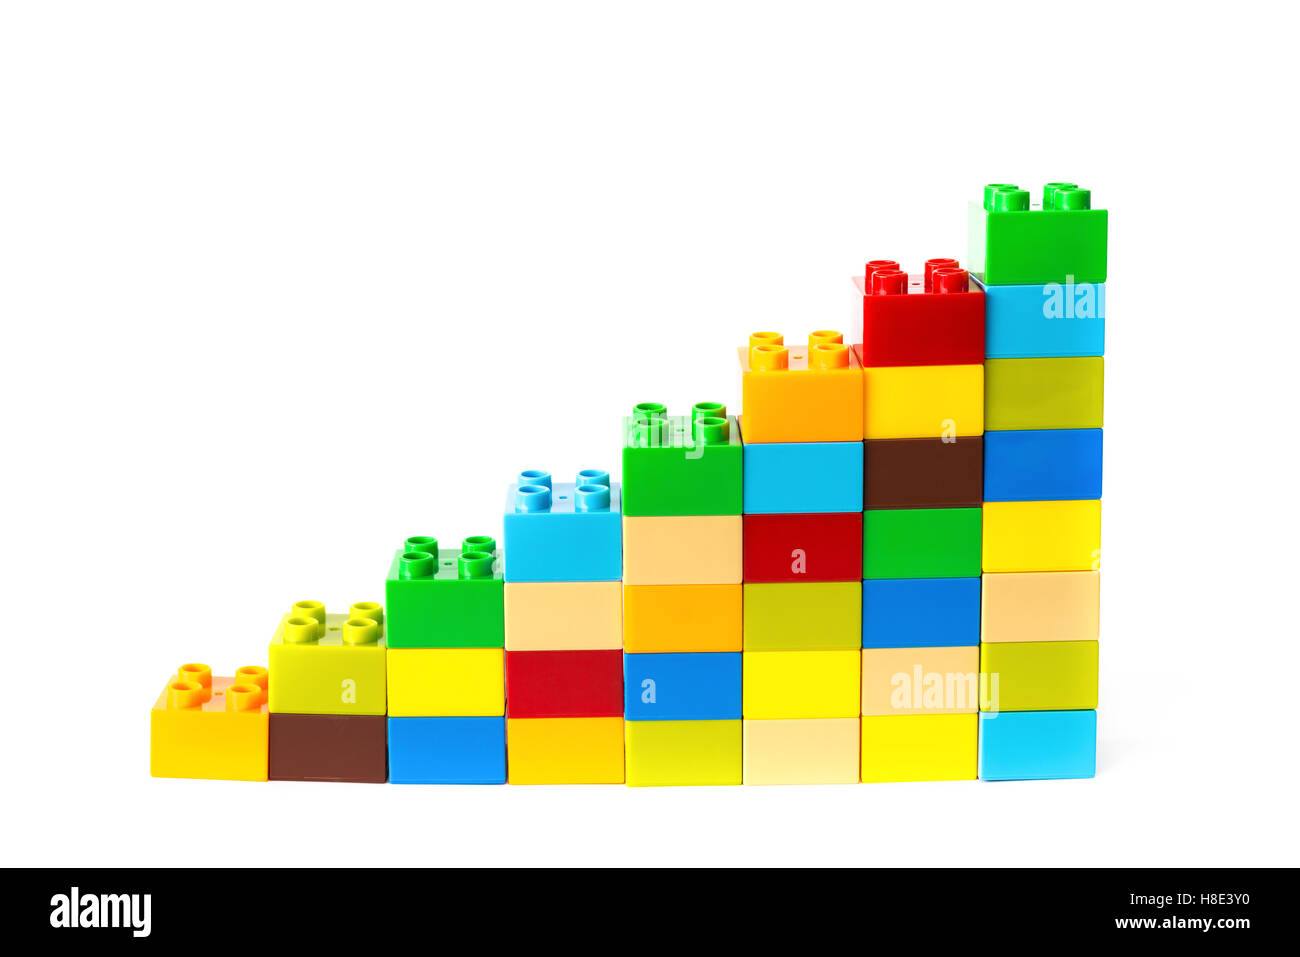 toy bricks shape as a growing trend on white background Stock Photo